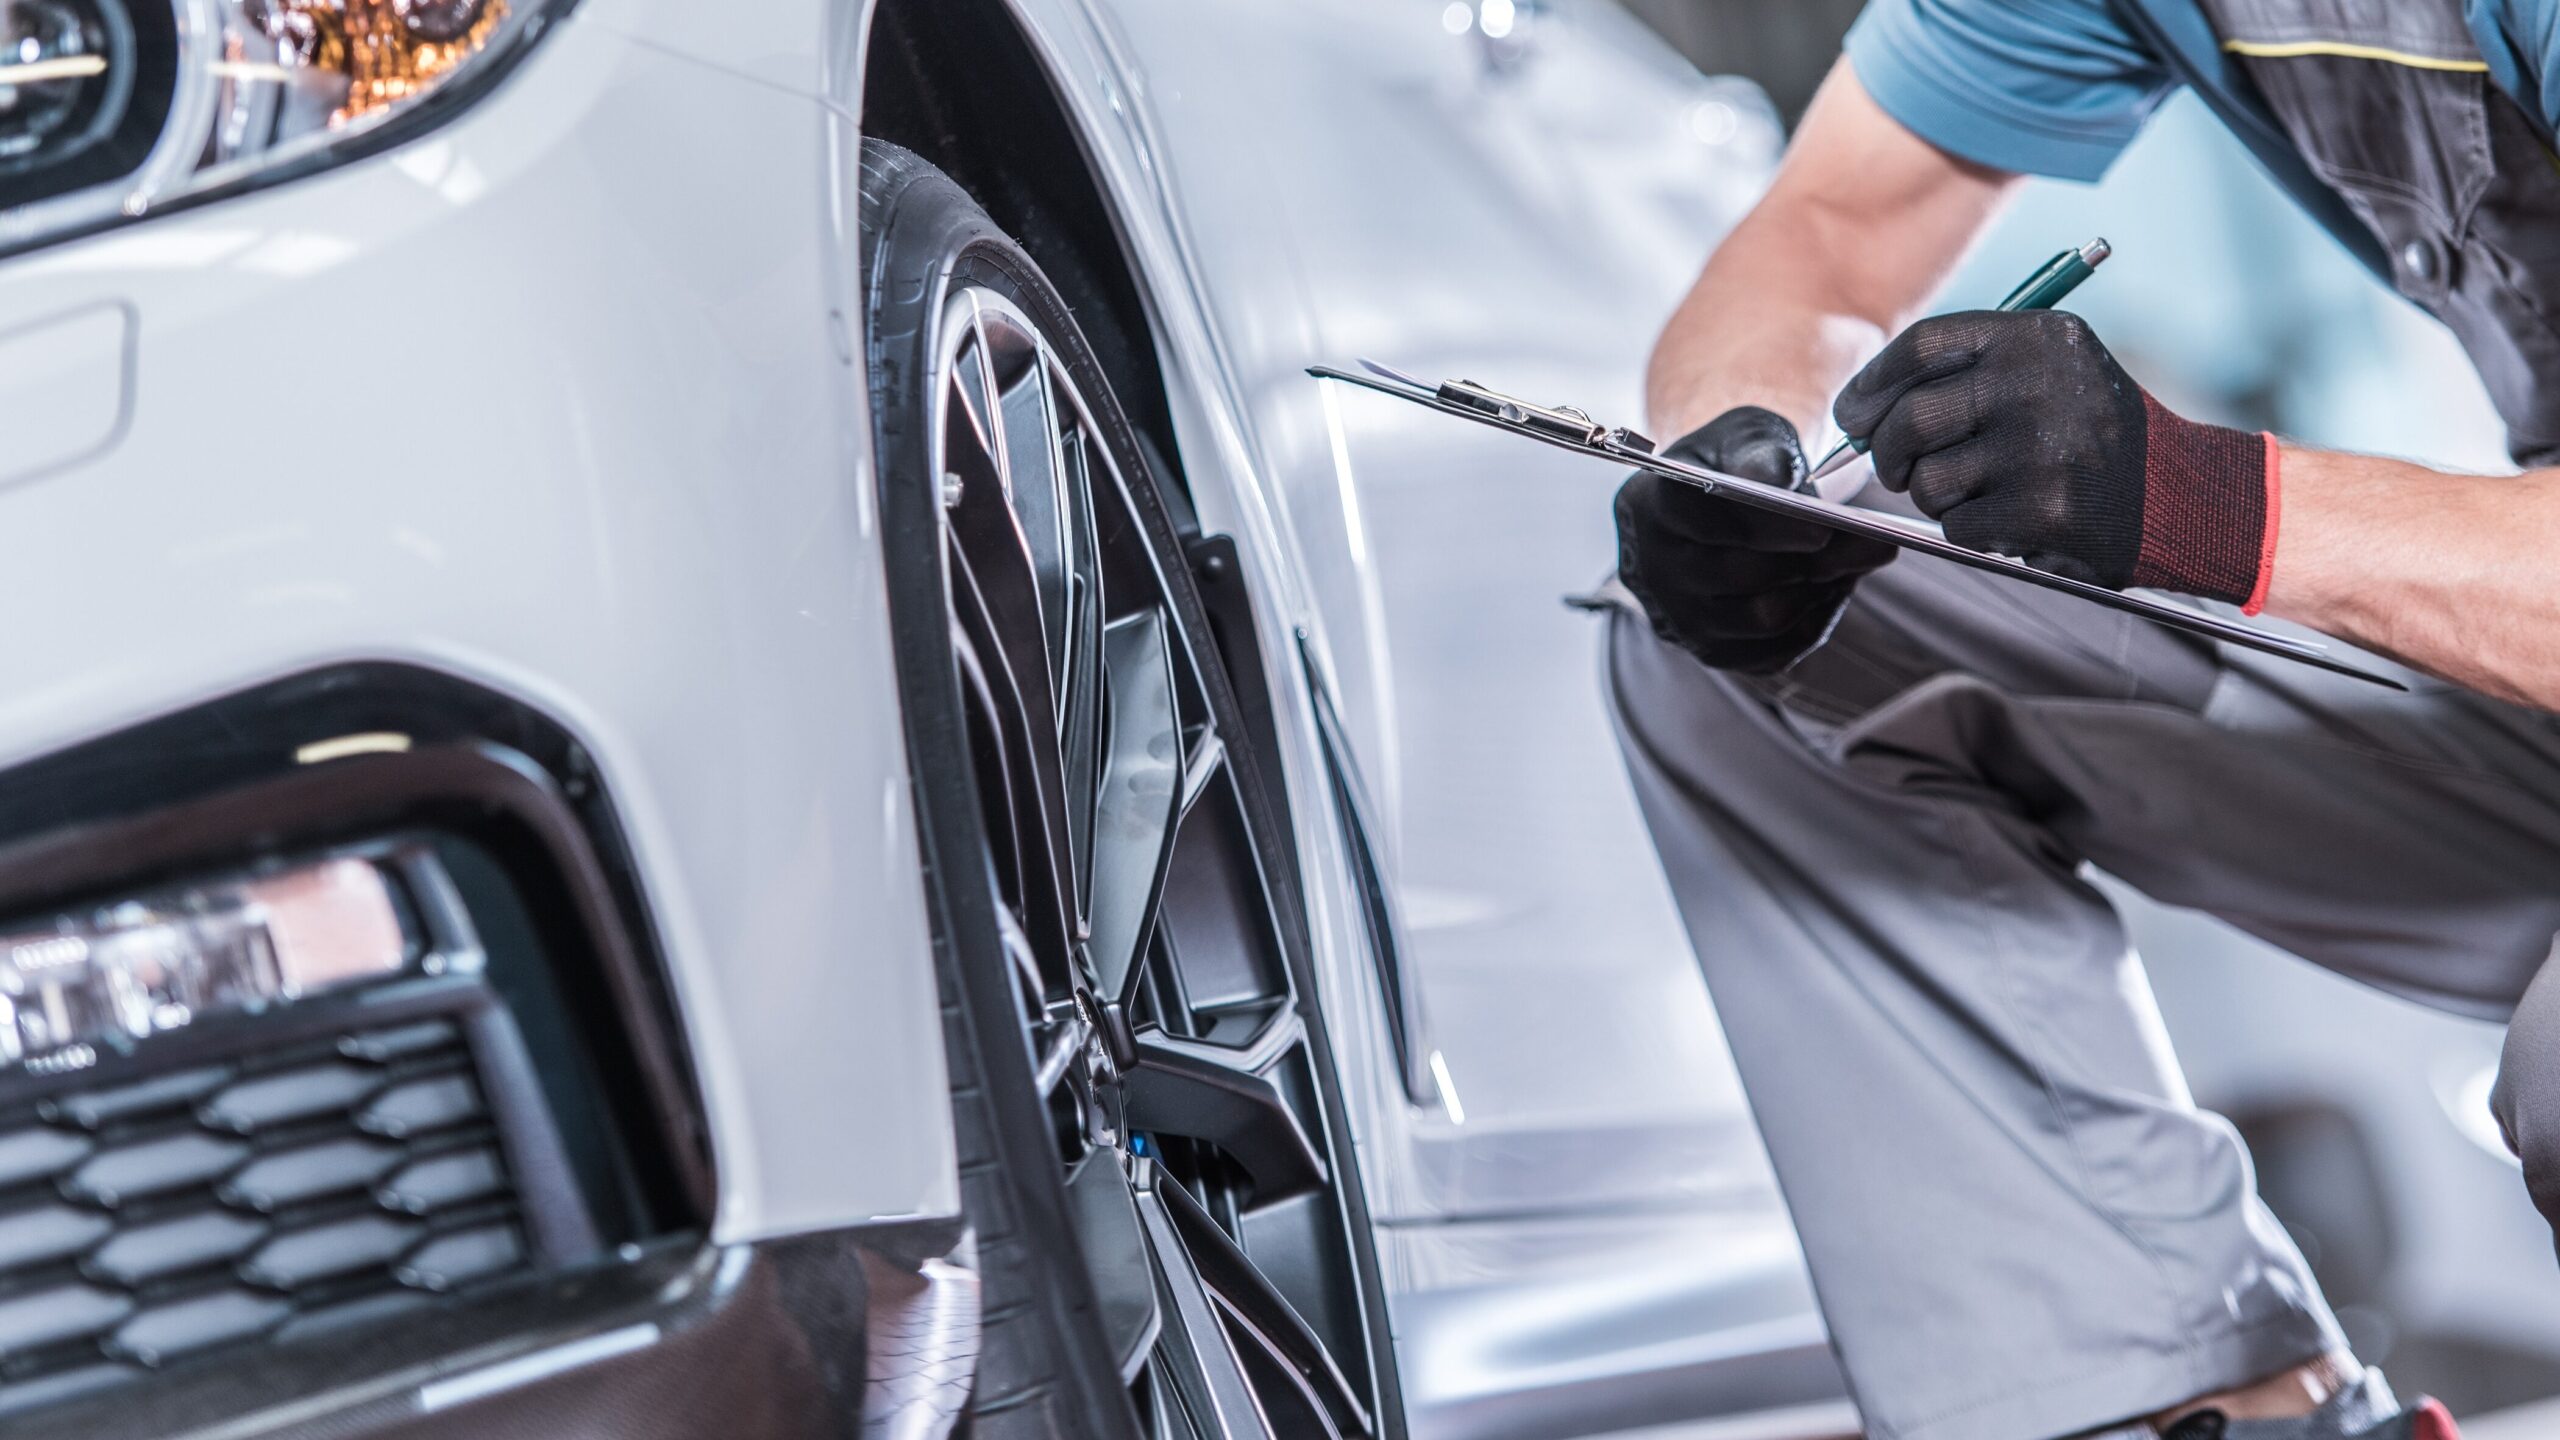 5 ways to build trust with automotive customers